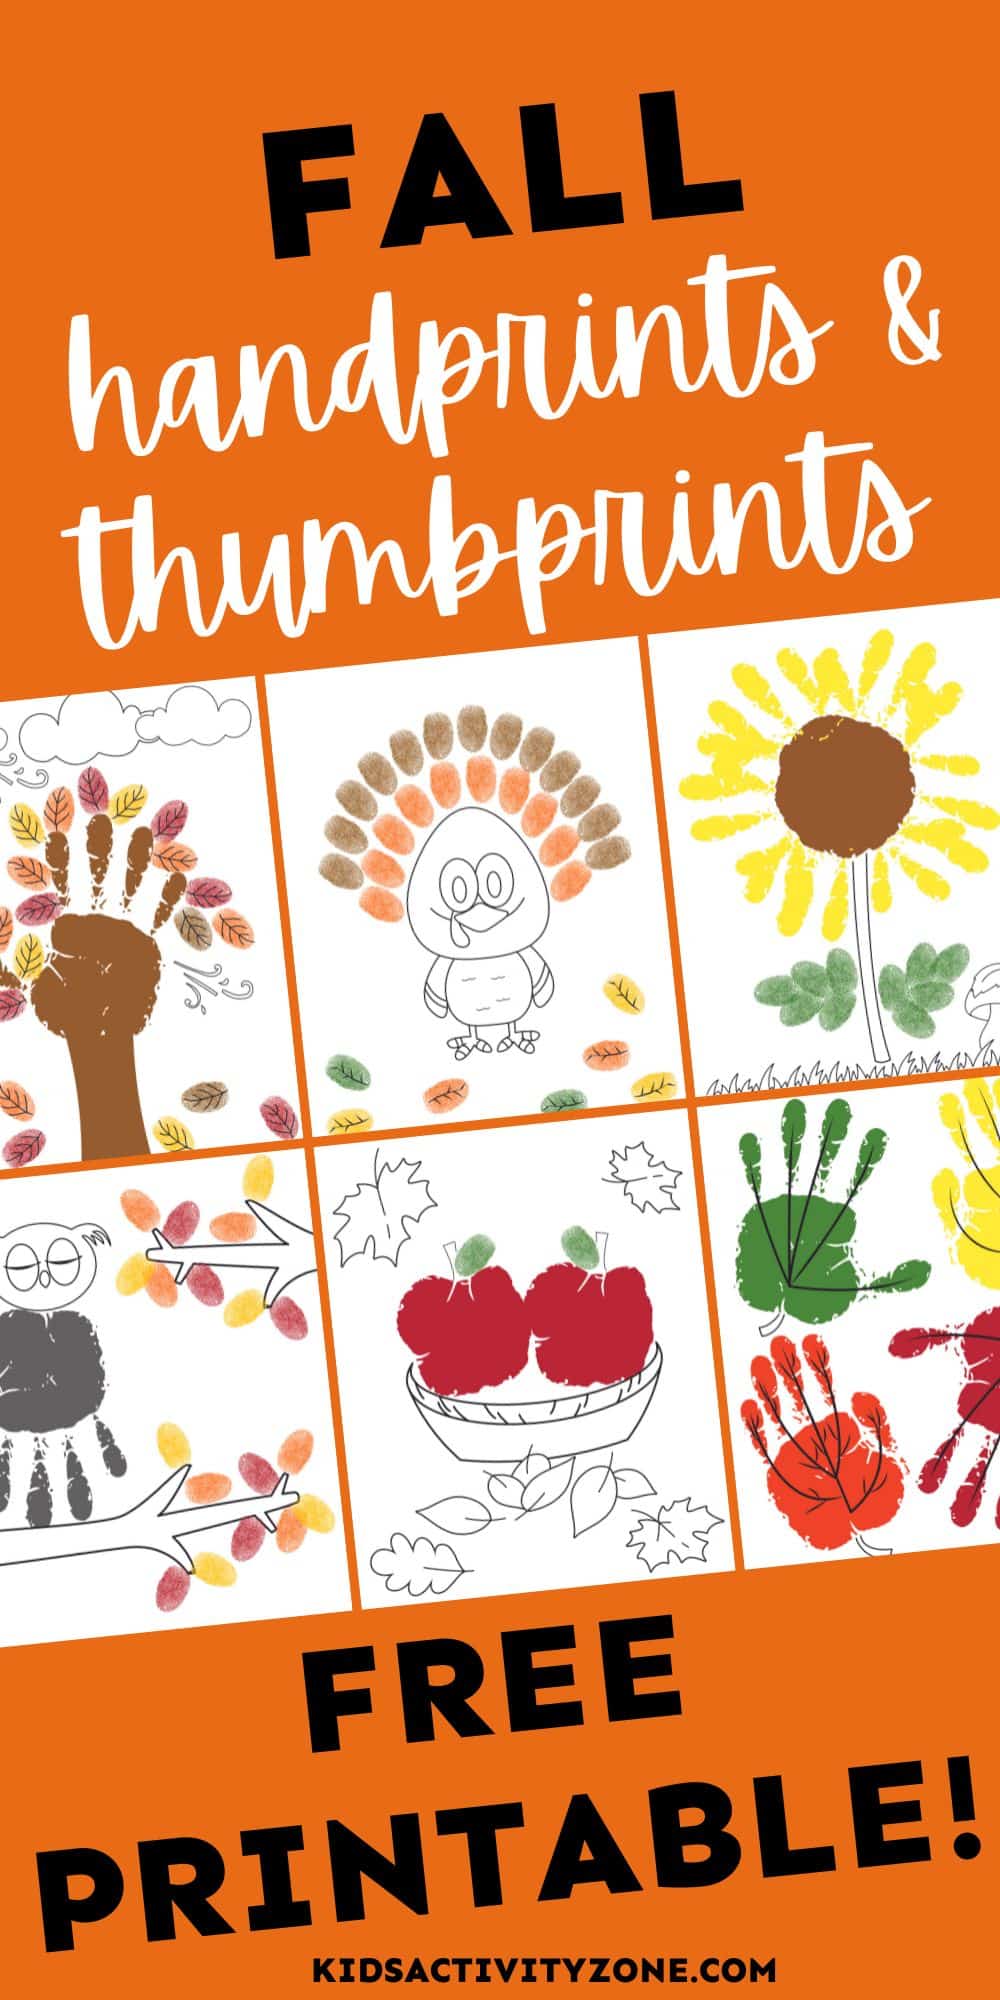 Easy fall fun with the kids! This free set of printable Fall Handprints and Thumbprints activities includes 12 different fall scenes to decorate. Such an easy and fun fall activity with little prep.